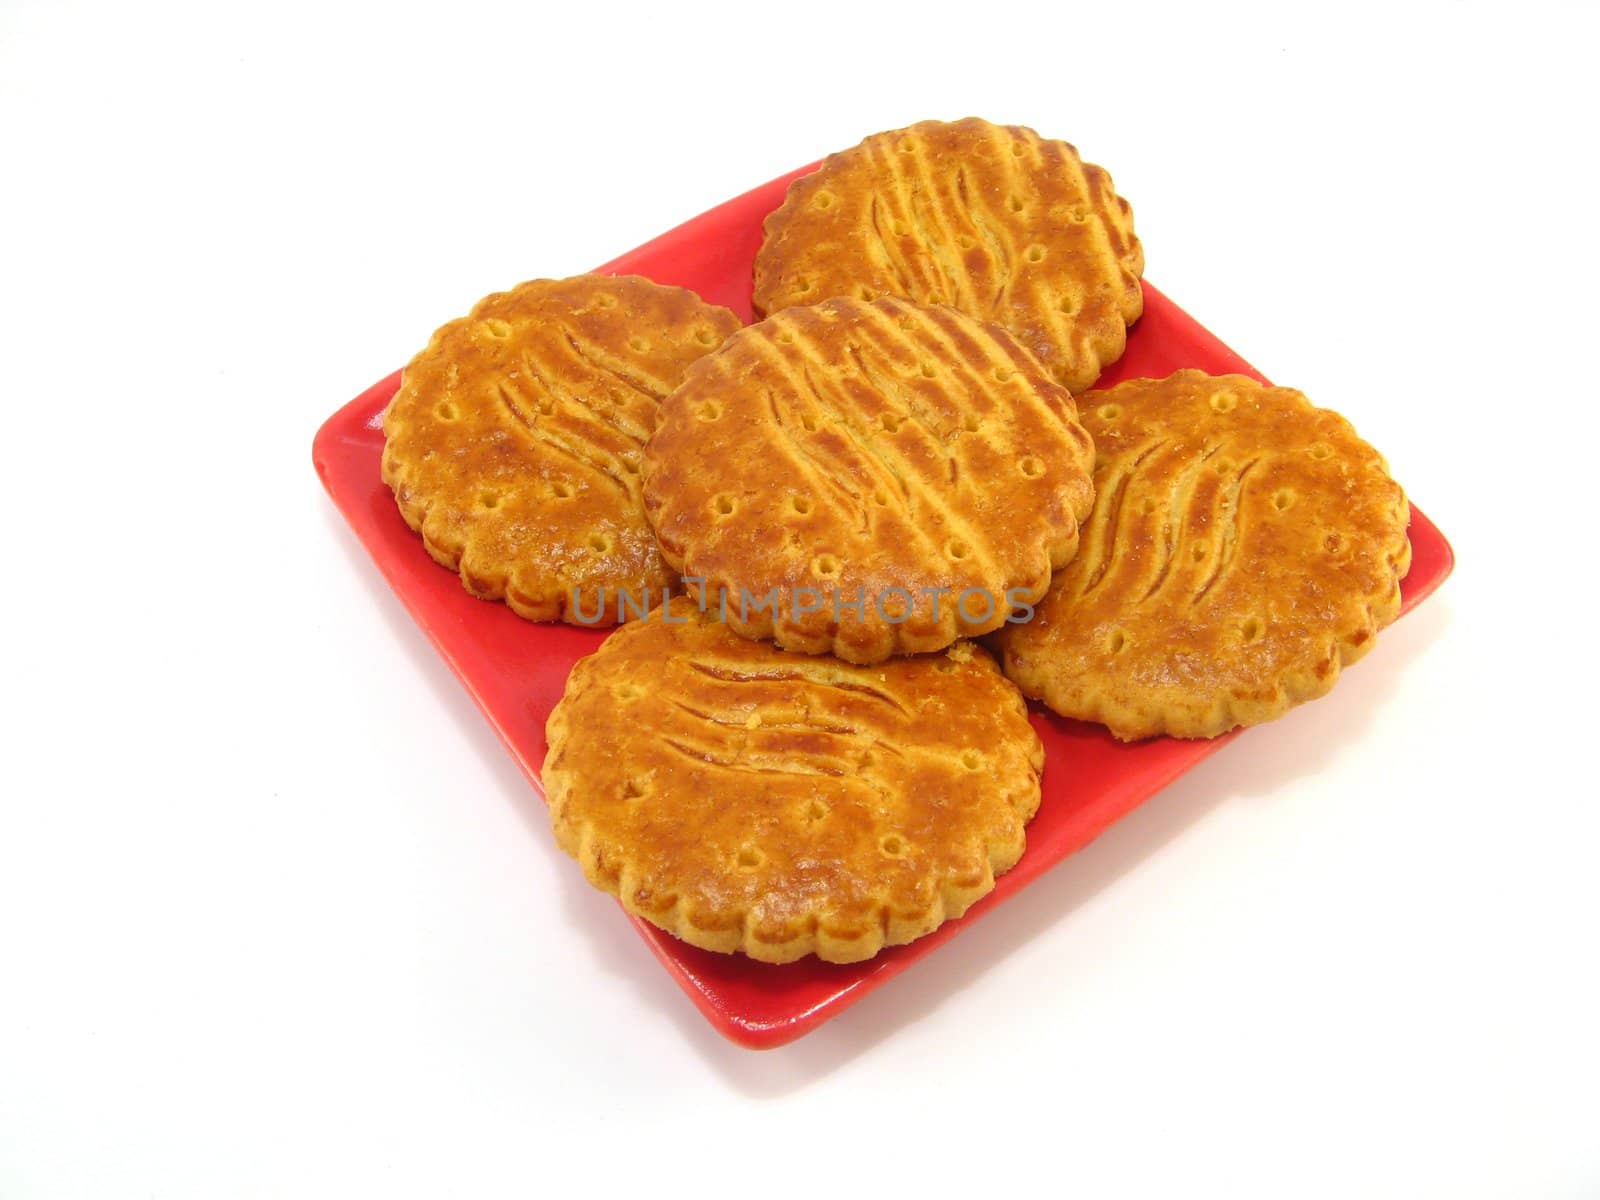 image of a plate with some biscuits over a white background